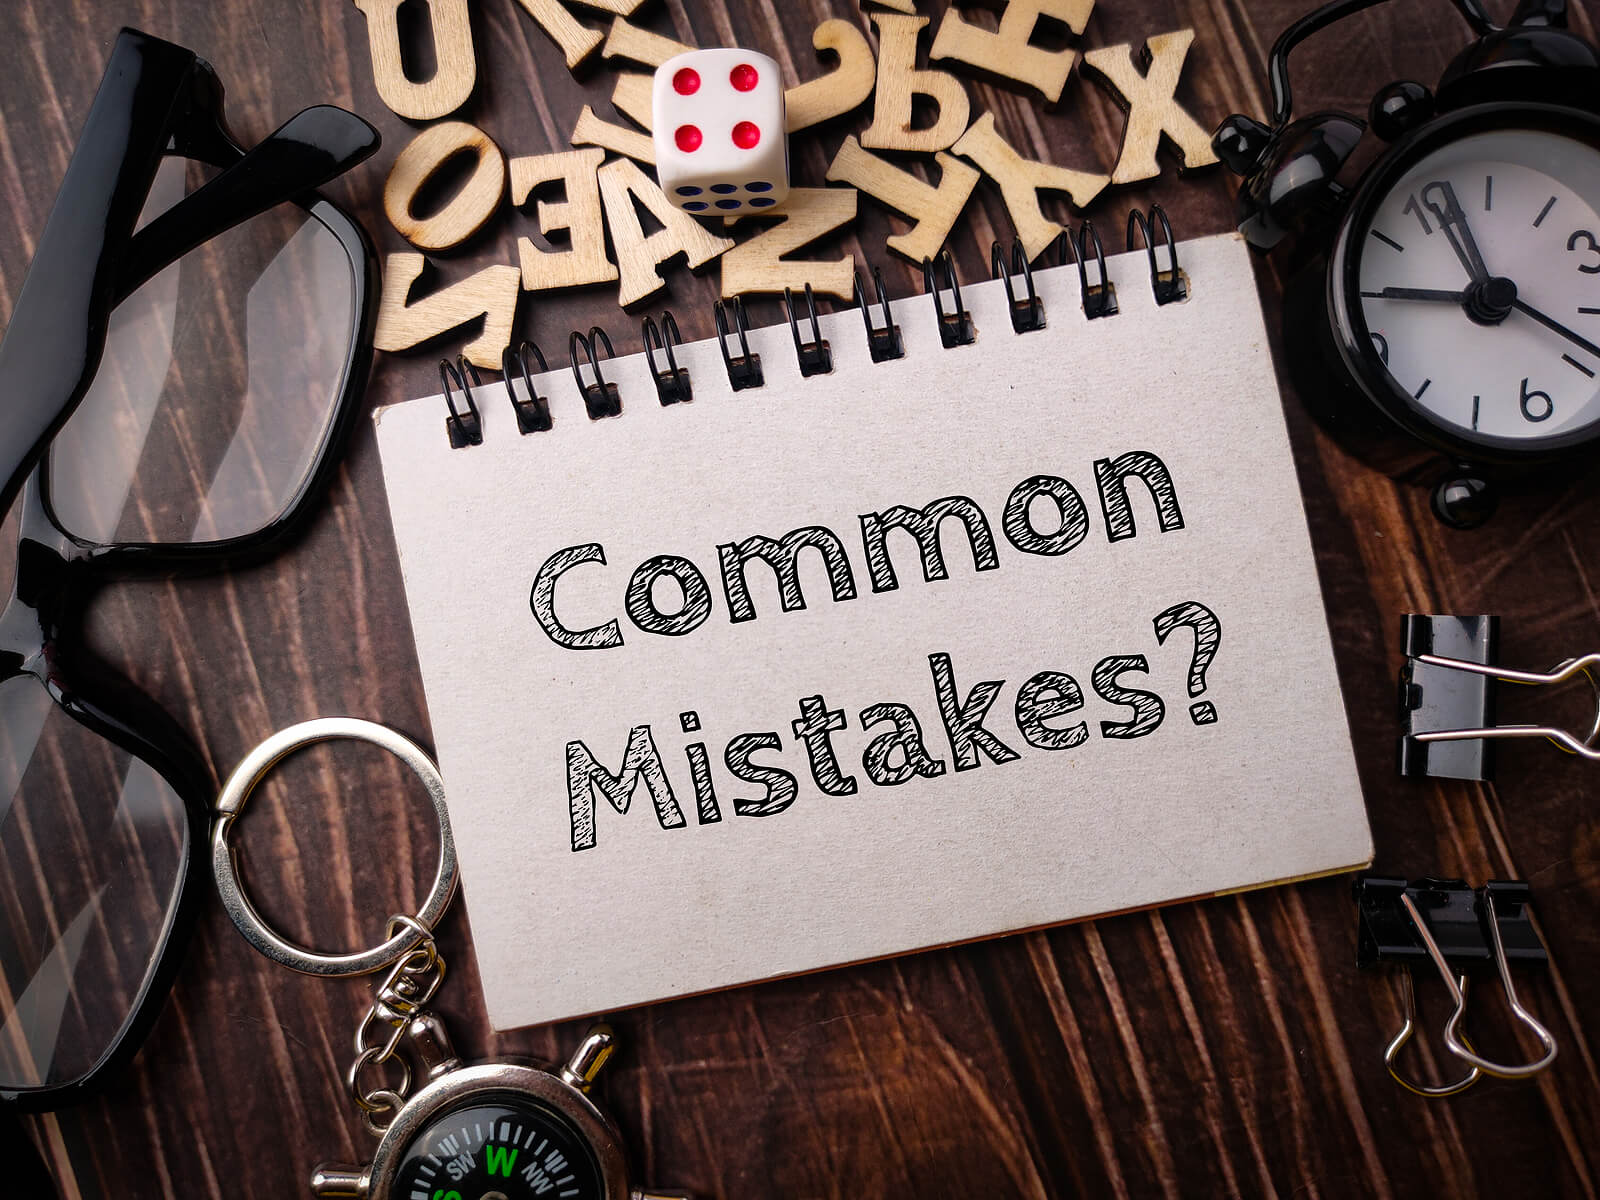 10 Common Management Mistakes Every Business Owner Should Avoid